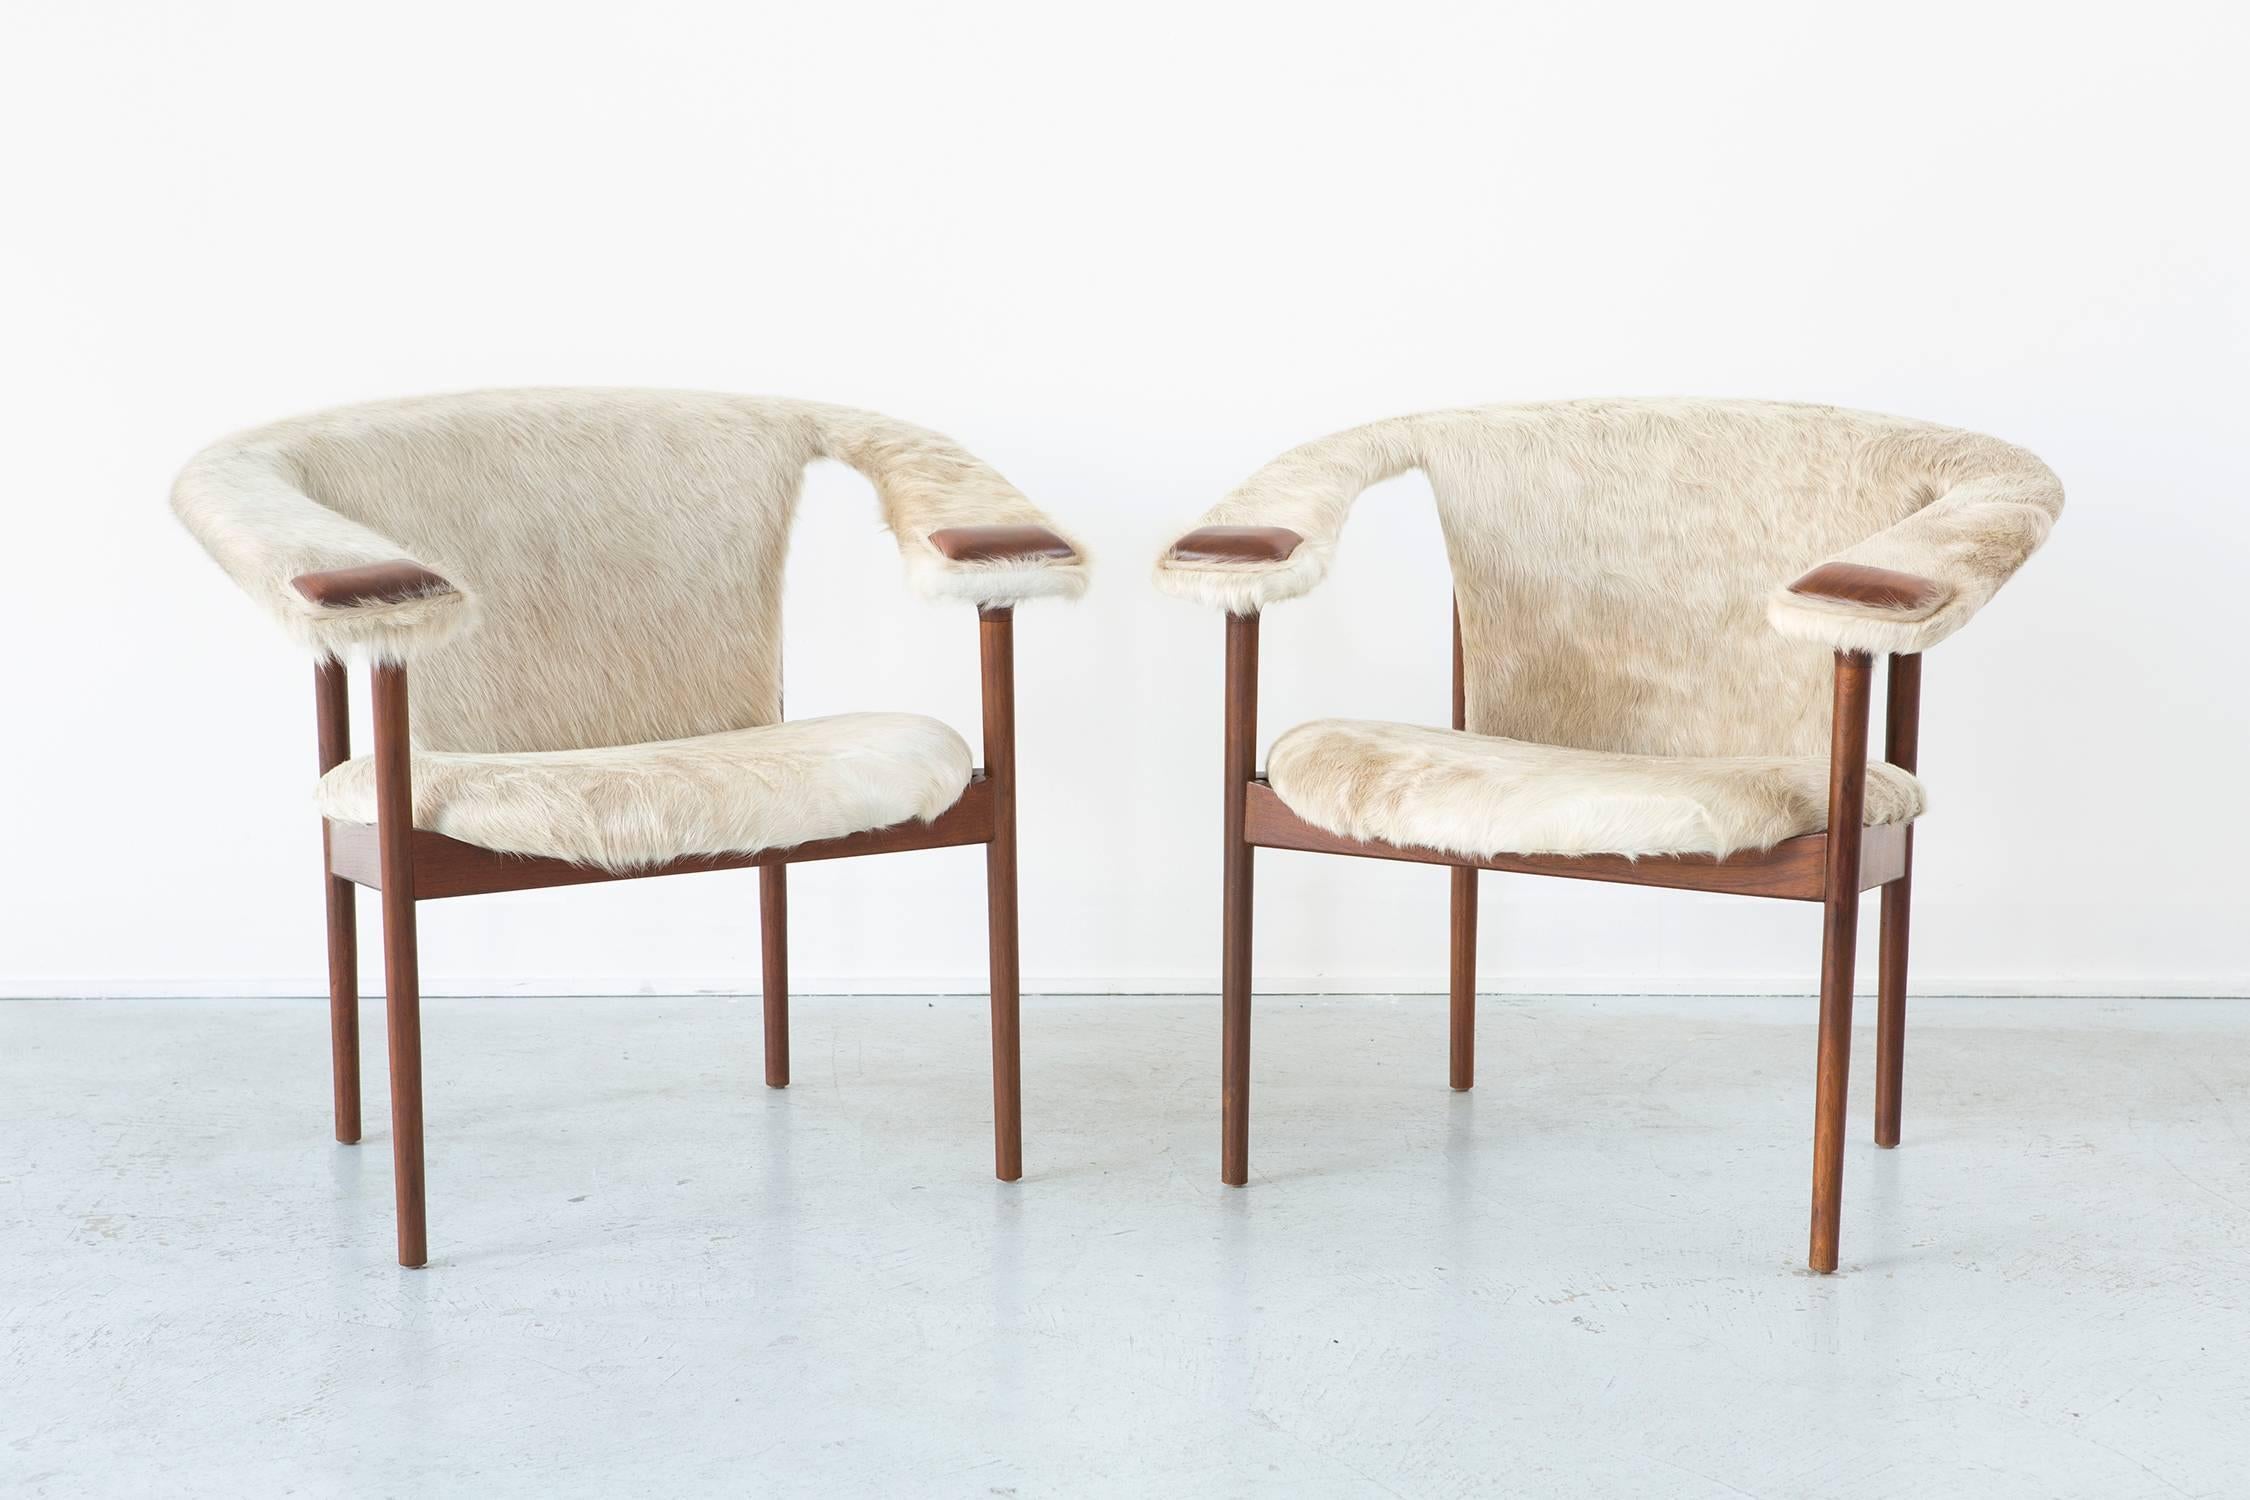 Rare set of lounge chairs.

Designed by Adrian Pearsall for Craft Associates,

USA.

Reupholstered in Brazilian cowhide with walnut frames refinished. 

Measures: 29 ¾" H x 32" W x 27 ½" D x seat 18" H.

Sold as a